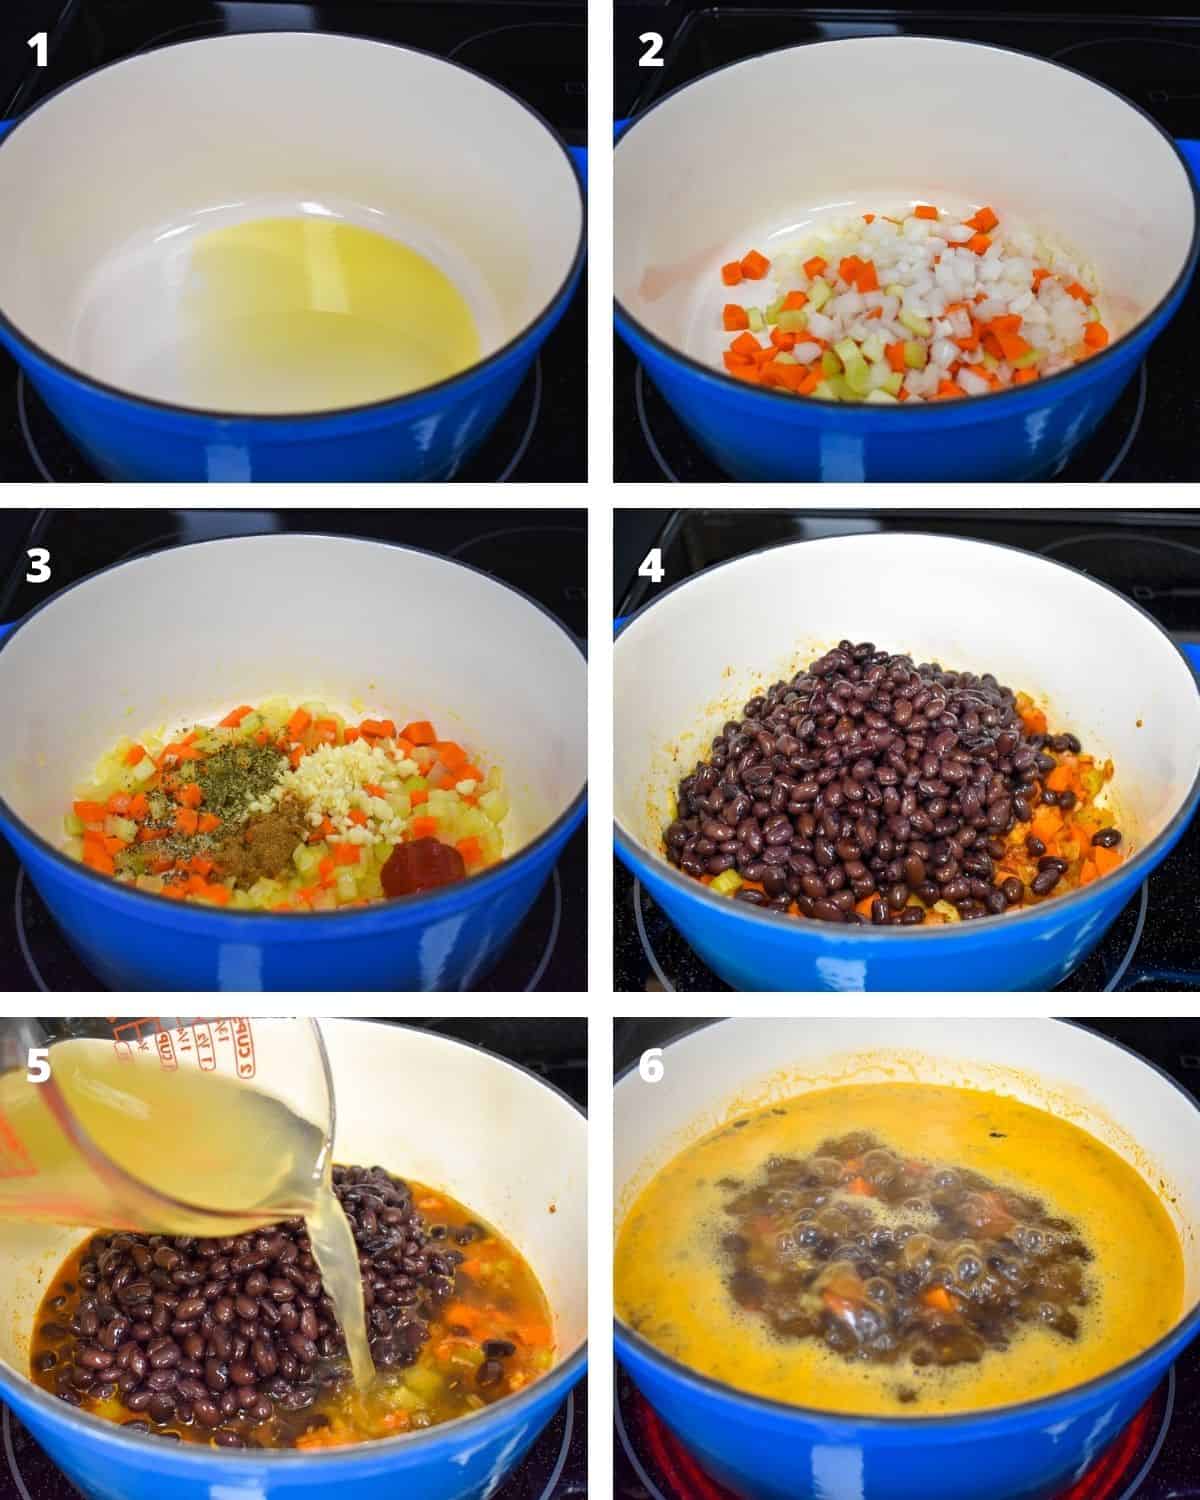 Six images showing the steps to making the soup in a blue pot with a white inside.